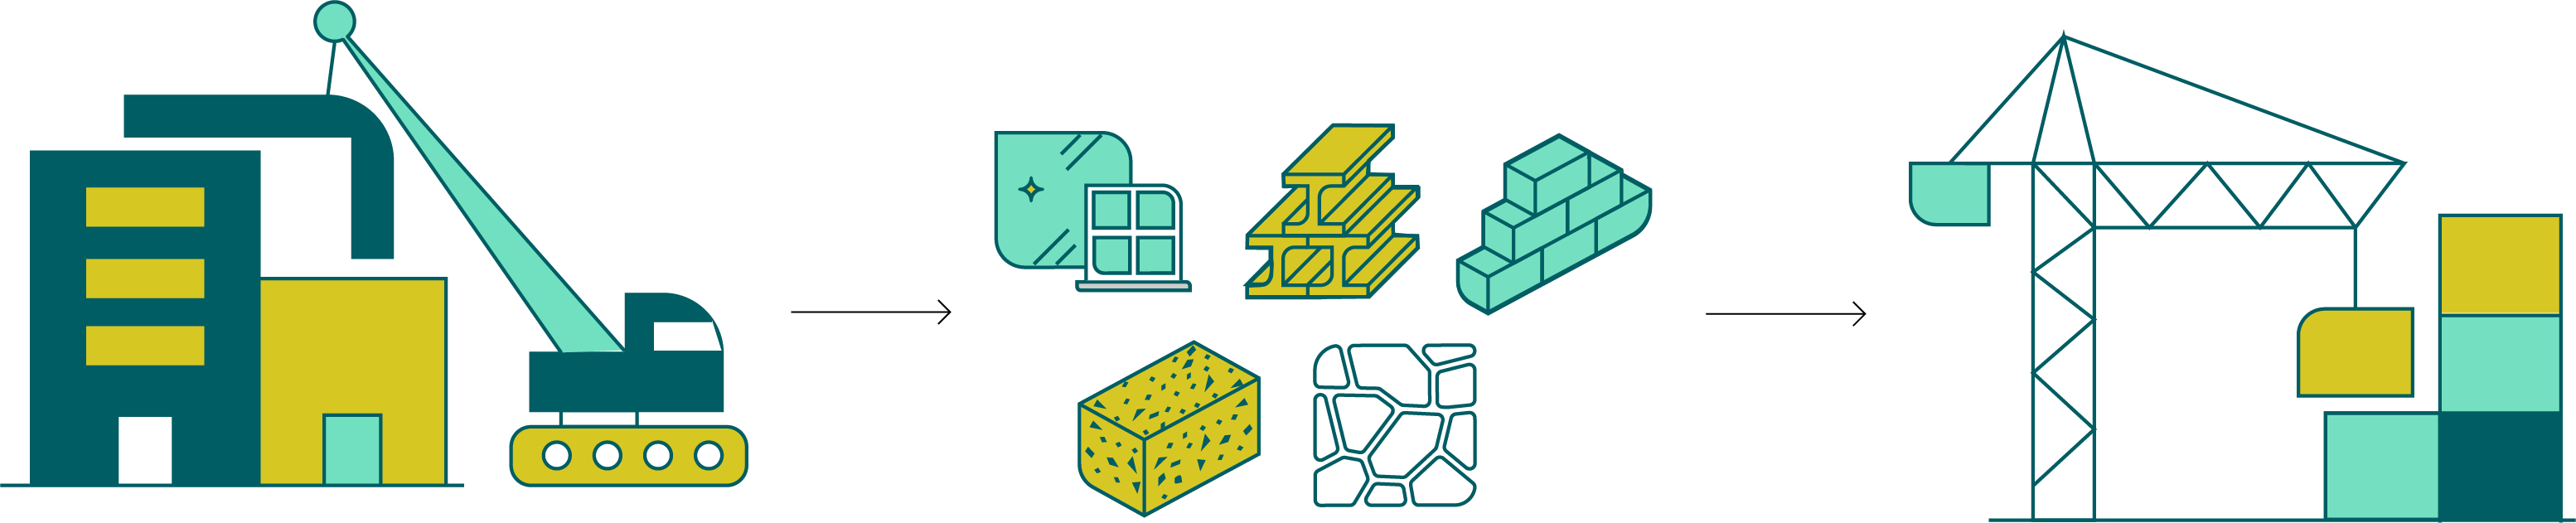 Illustration showing deconstruction of a building with a arrow to materials and then an arrow to a new building.